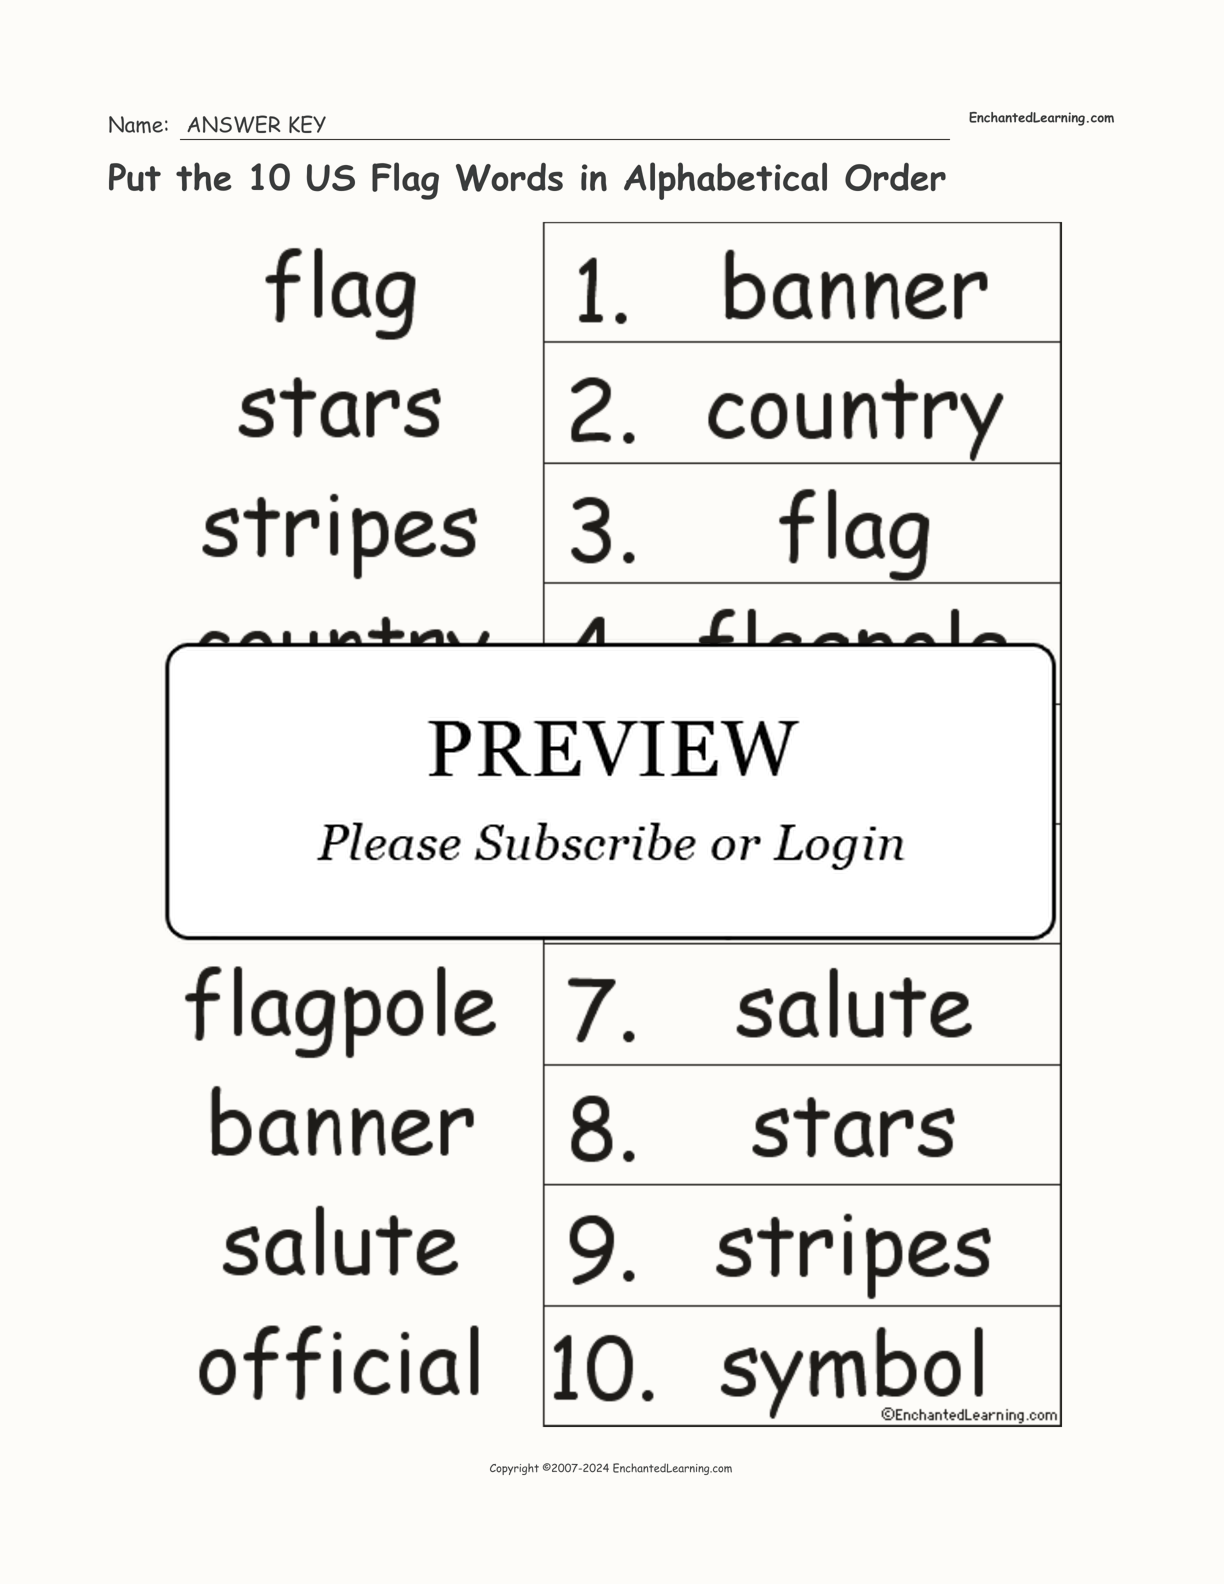 Put the 10 US Flag Words in Alphabetical Order interactive worksheet page 2